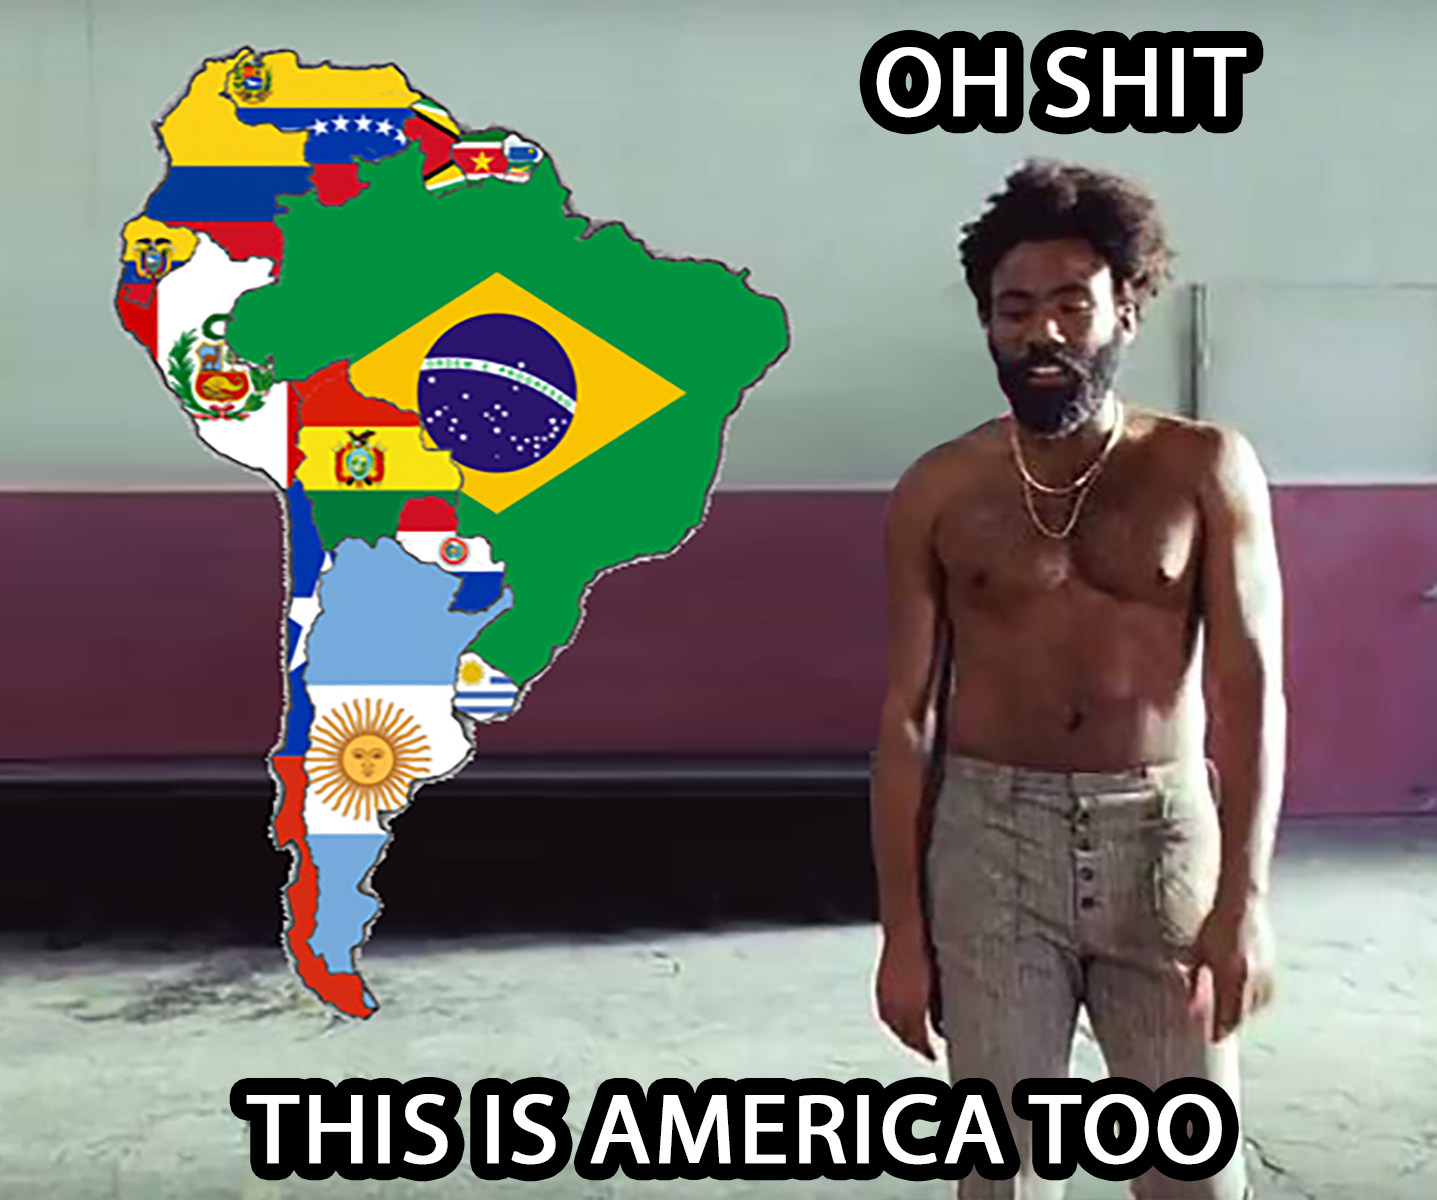 This is America, South America